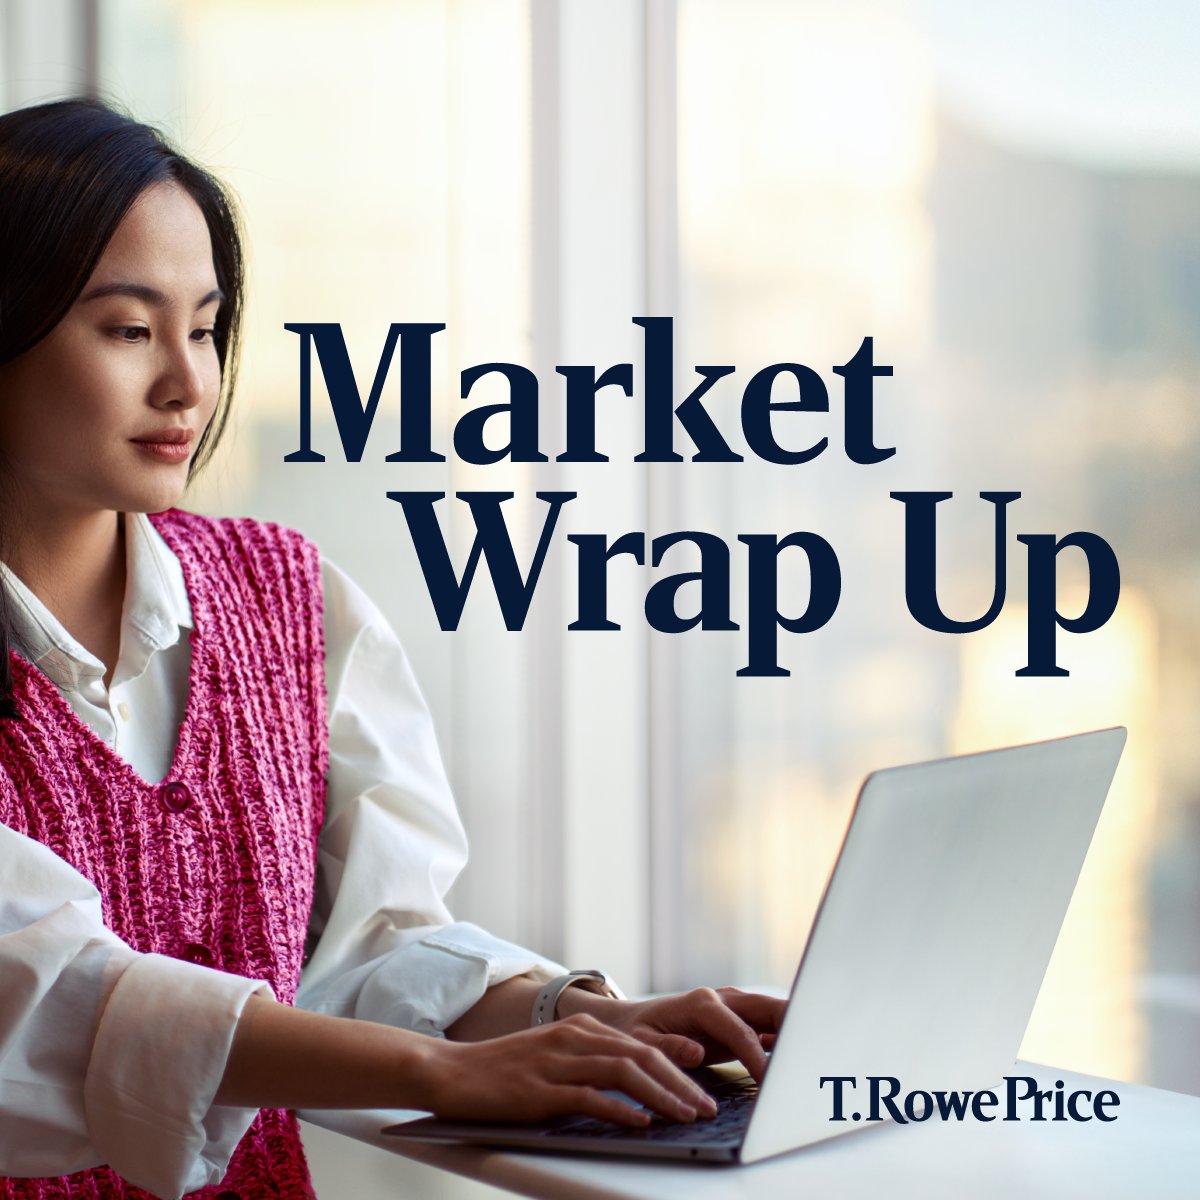 Don’t stress about every movement that occurred in investment markets worldwide. That’s our job. Read our weekly Market Wrap-Up to get the latest insights. trowe.com/3UAo7Il